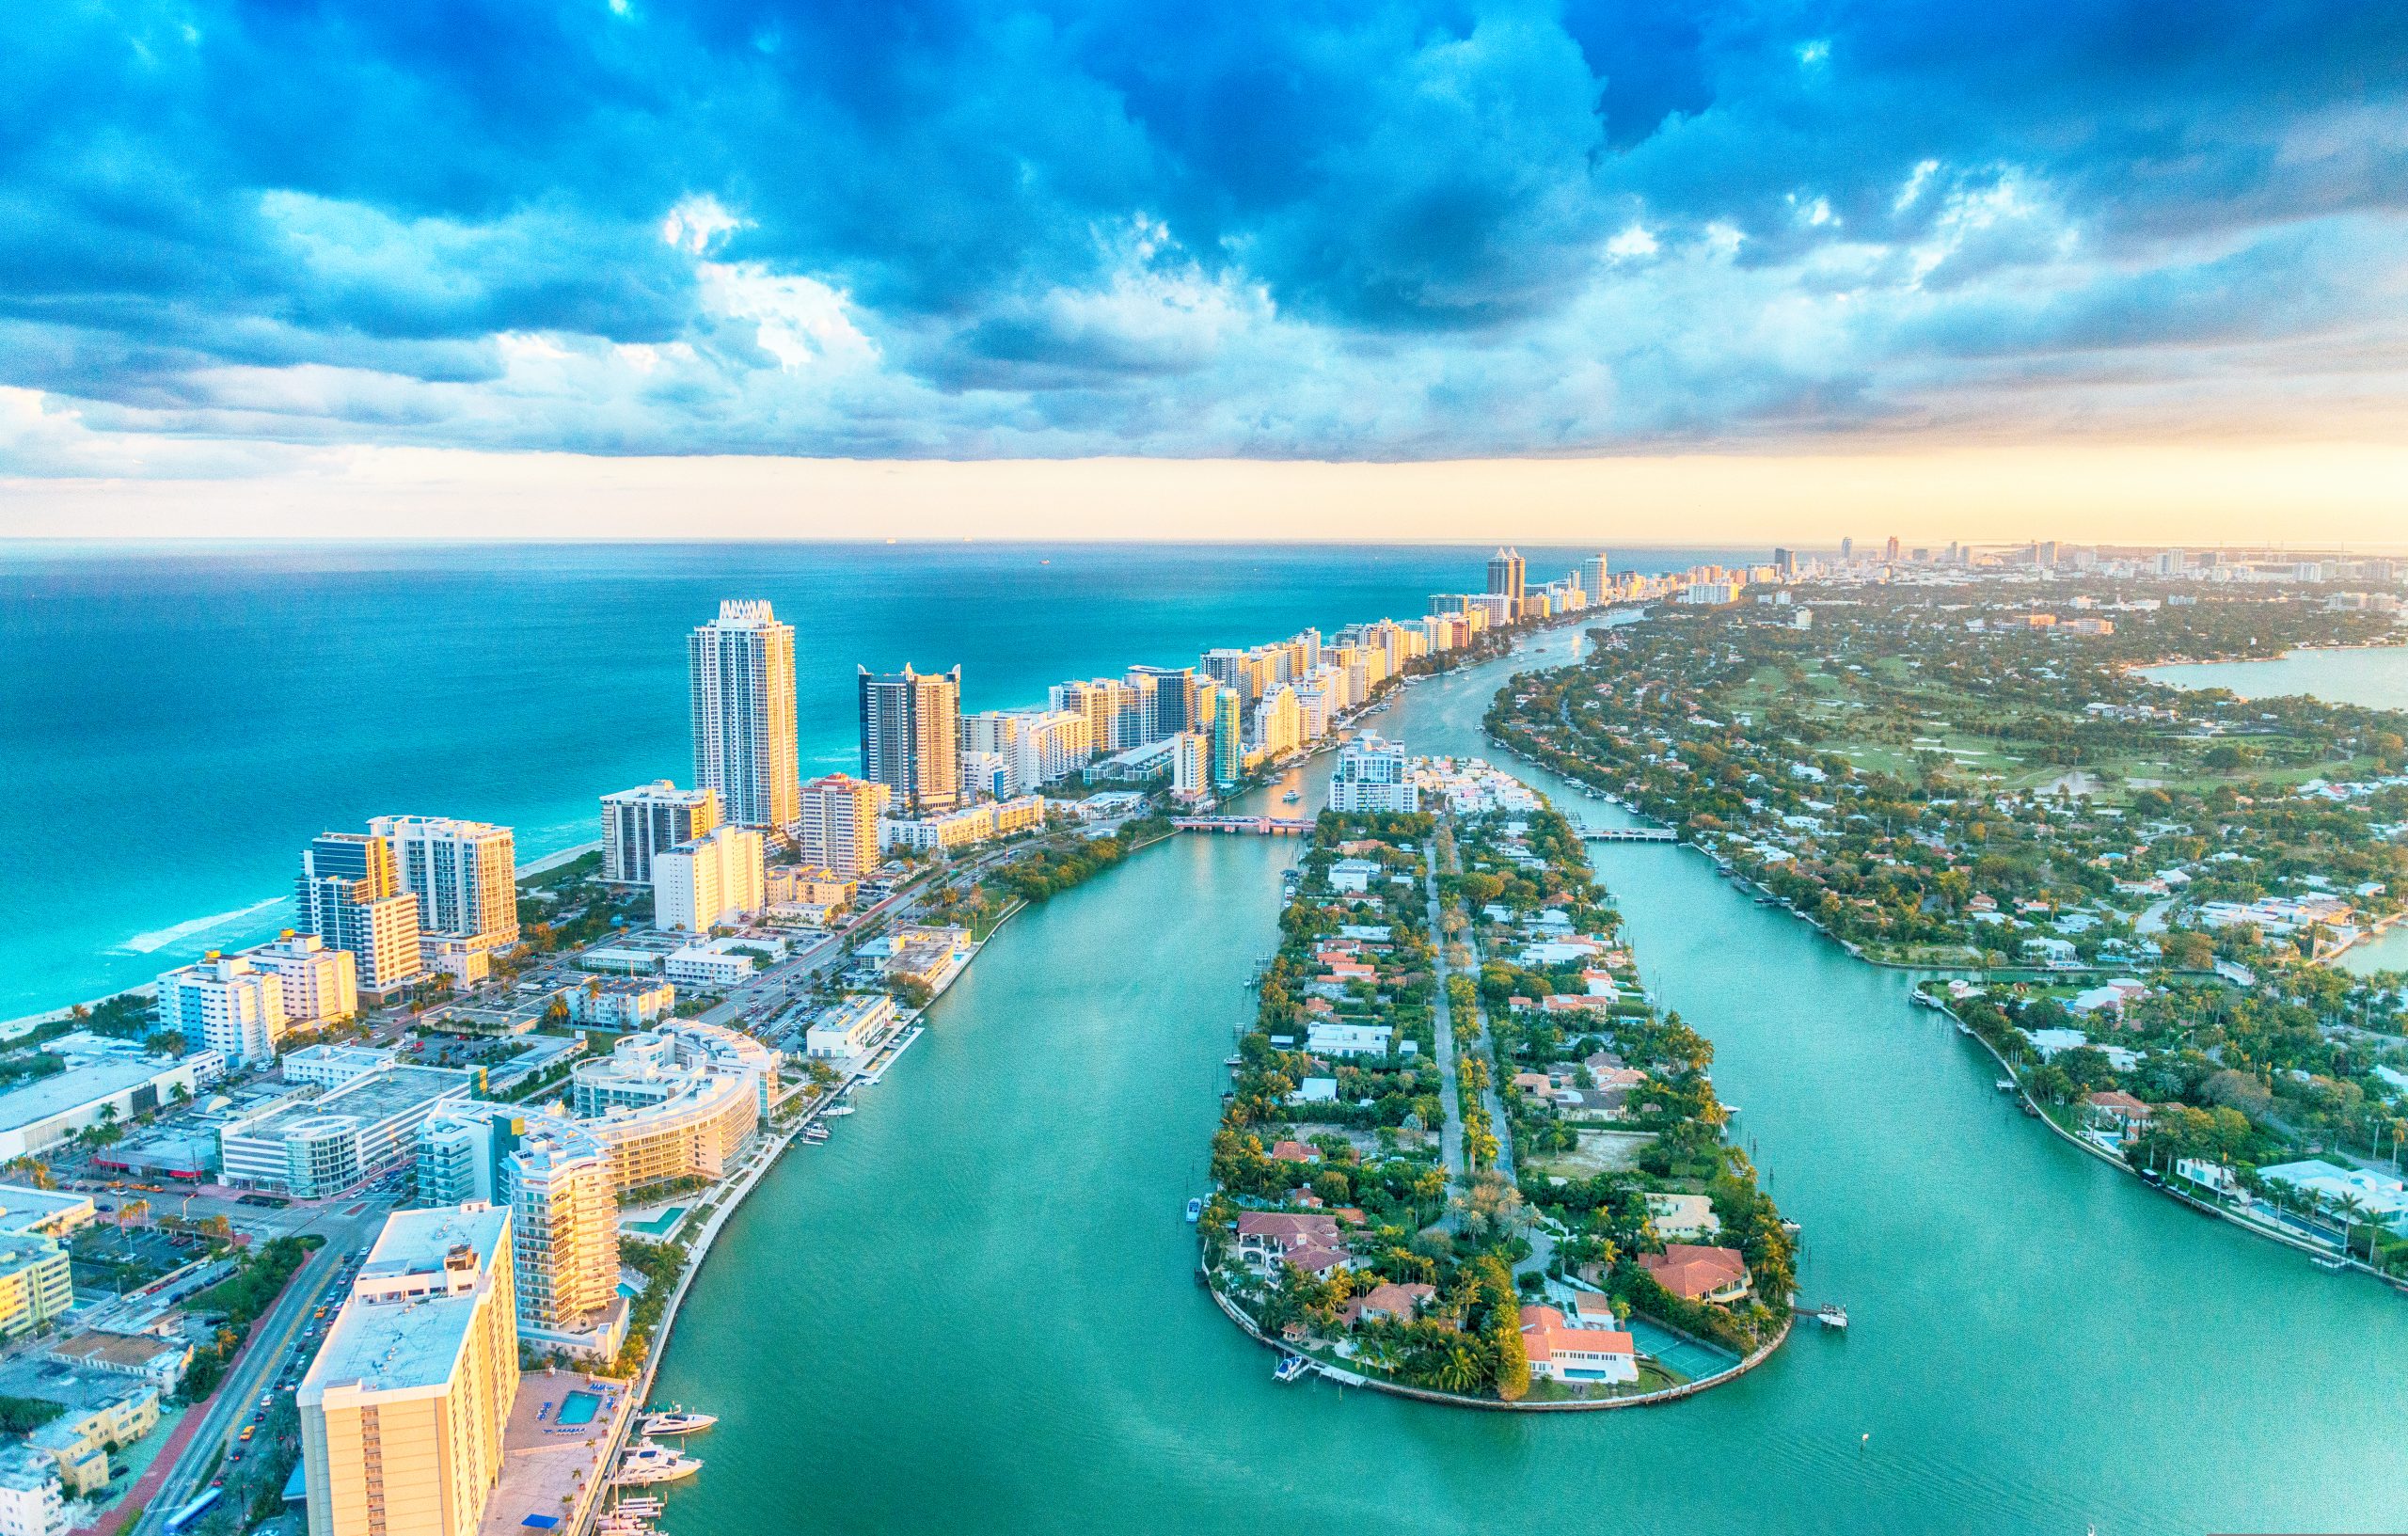 Miami,Beach,,Wonderful,Aerial,View,Of,Buildings,,River,And,Vegetation.